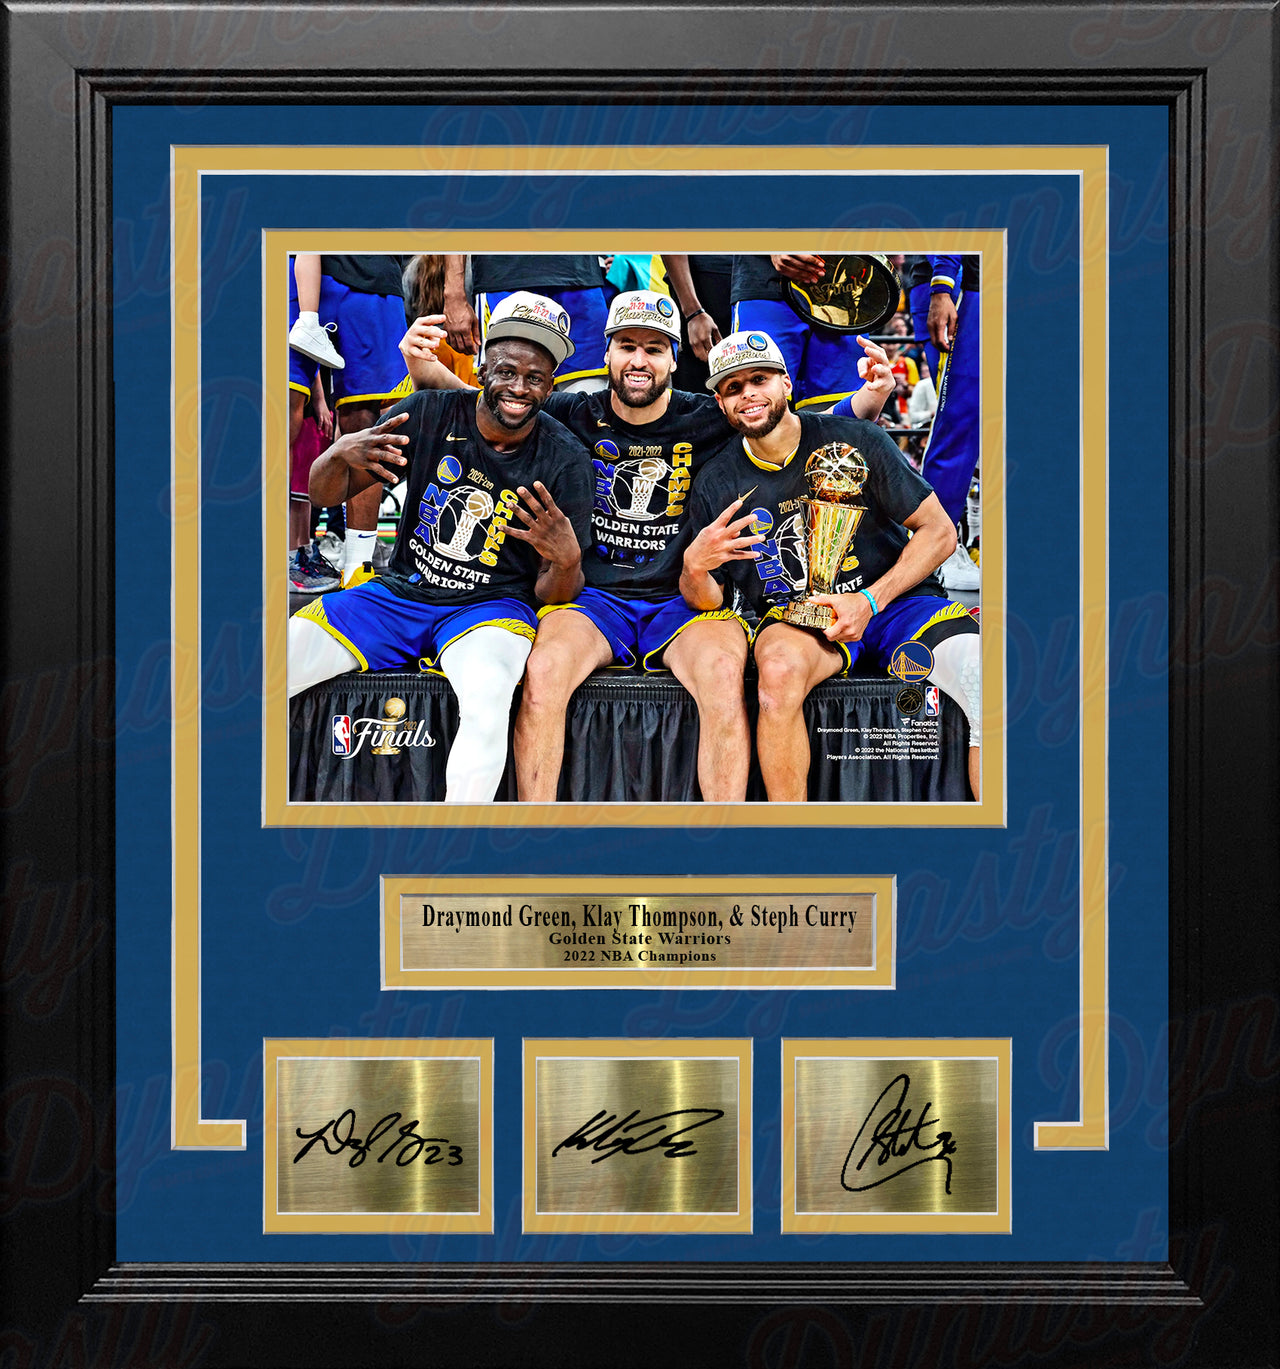 Draymond Green Klay Thompson Steph Curry Warriors Finals 8x10 Framed Photo with Engraved Autographs - Dynasty Sports & Framing 